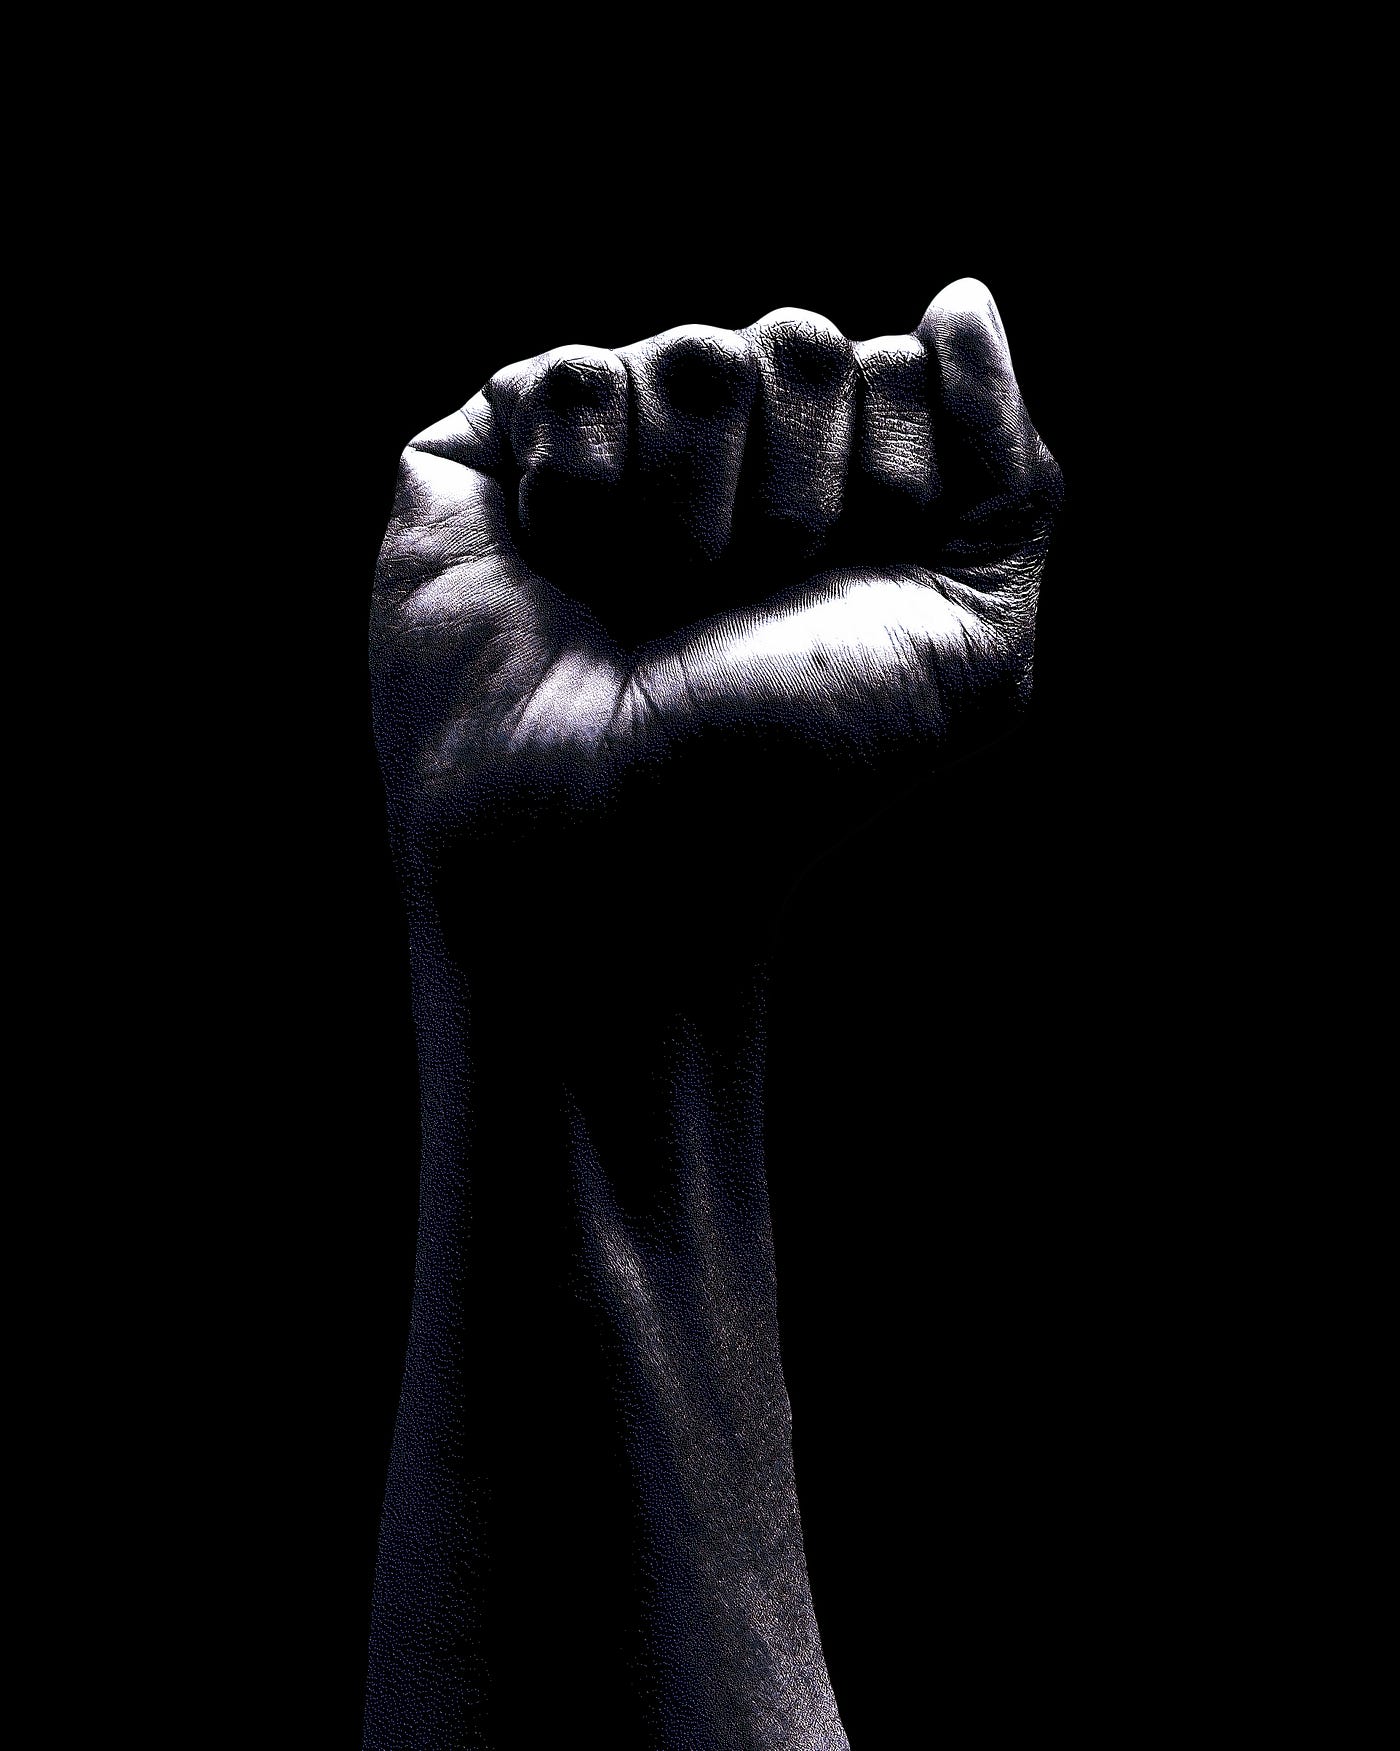 Arm held up, facing us with a closed fist. Black background. Black and white image.